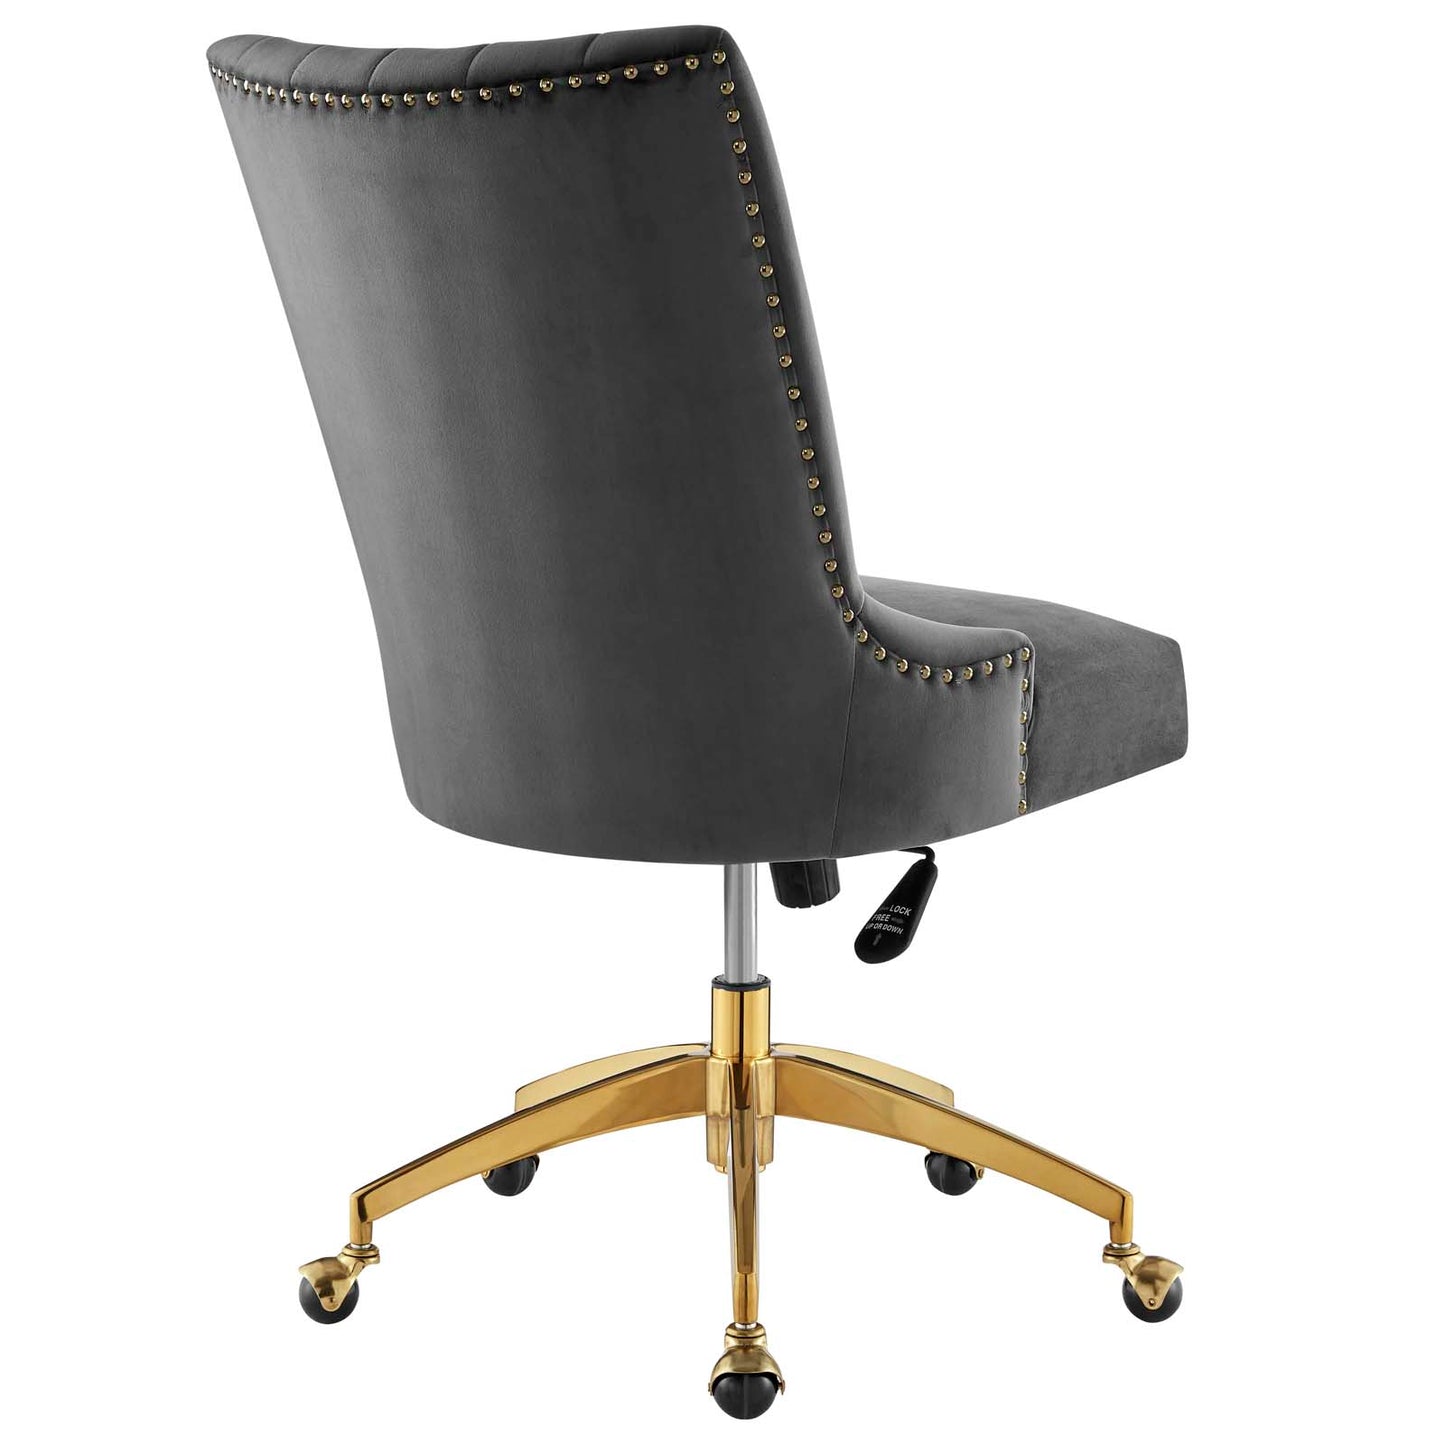 Empower Channel Tufted Performance Velvet Office Chair Gold Gray EEI-4575-GLD-GRY